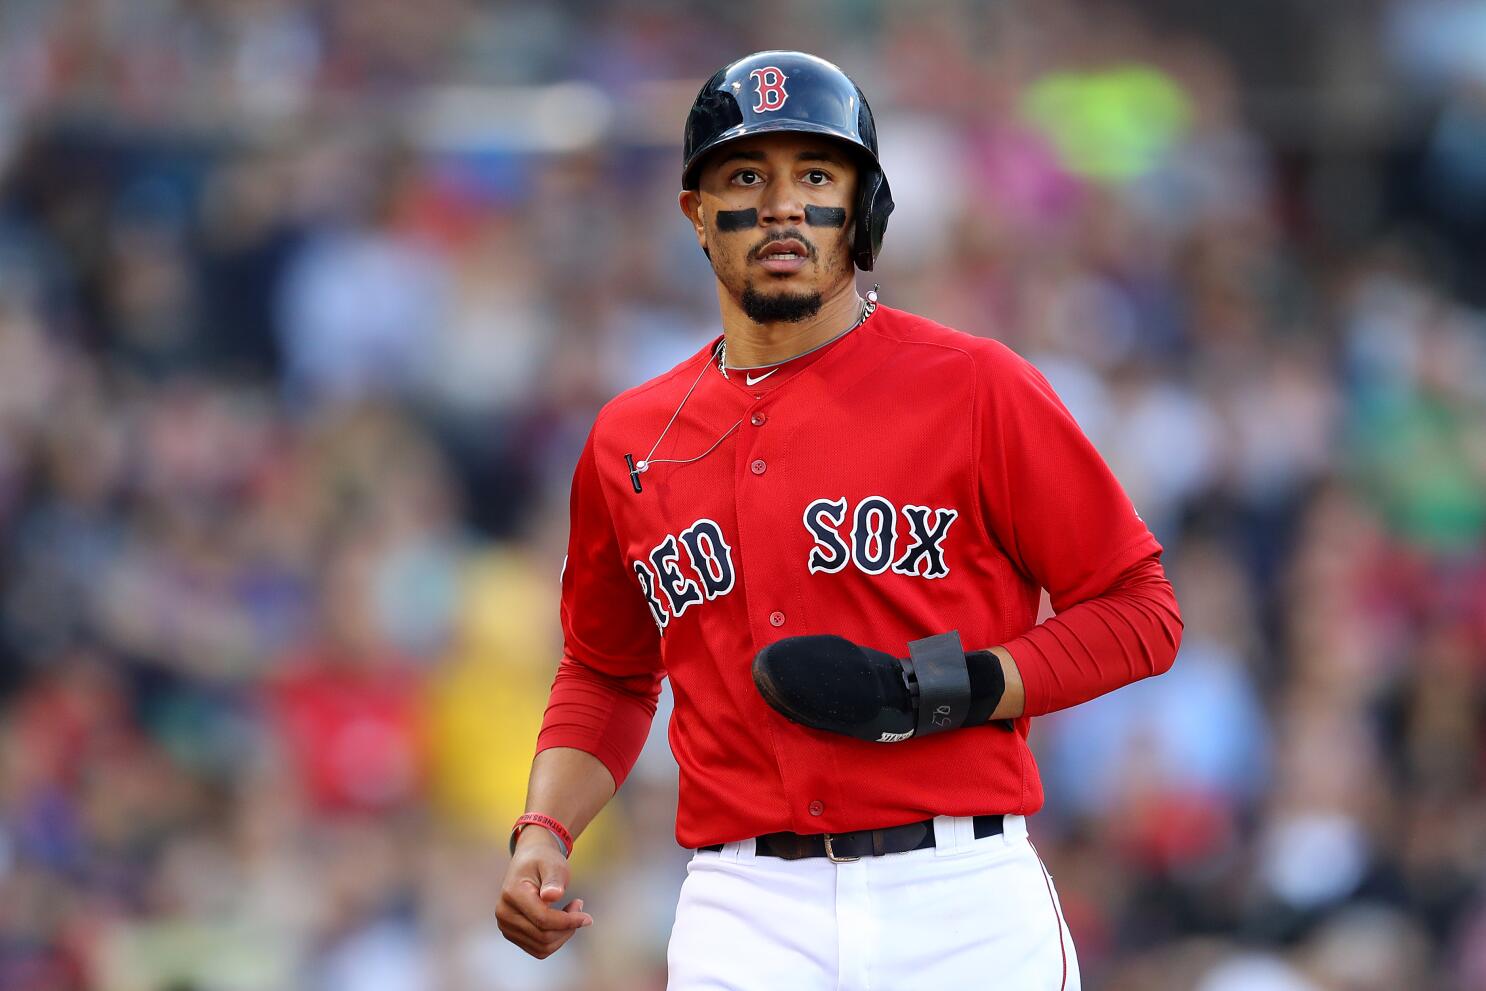 Red Sox star Mookie Betts named American League MVP